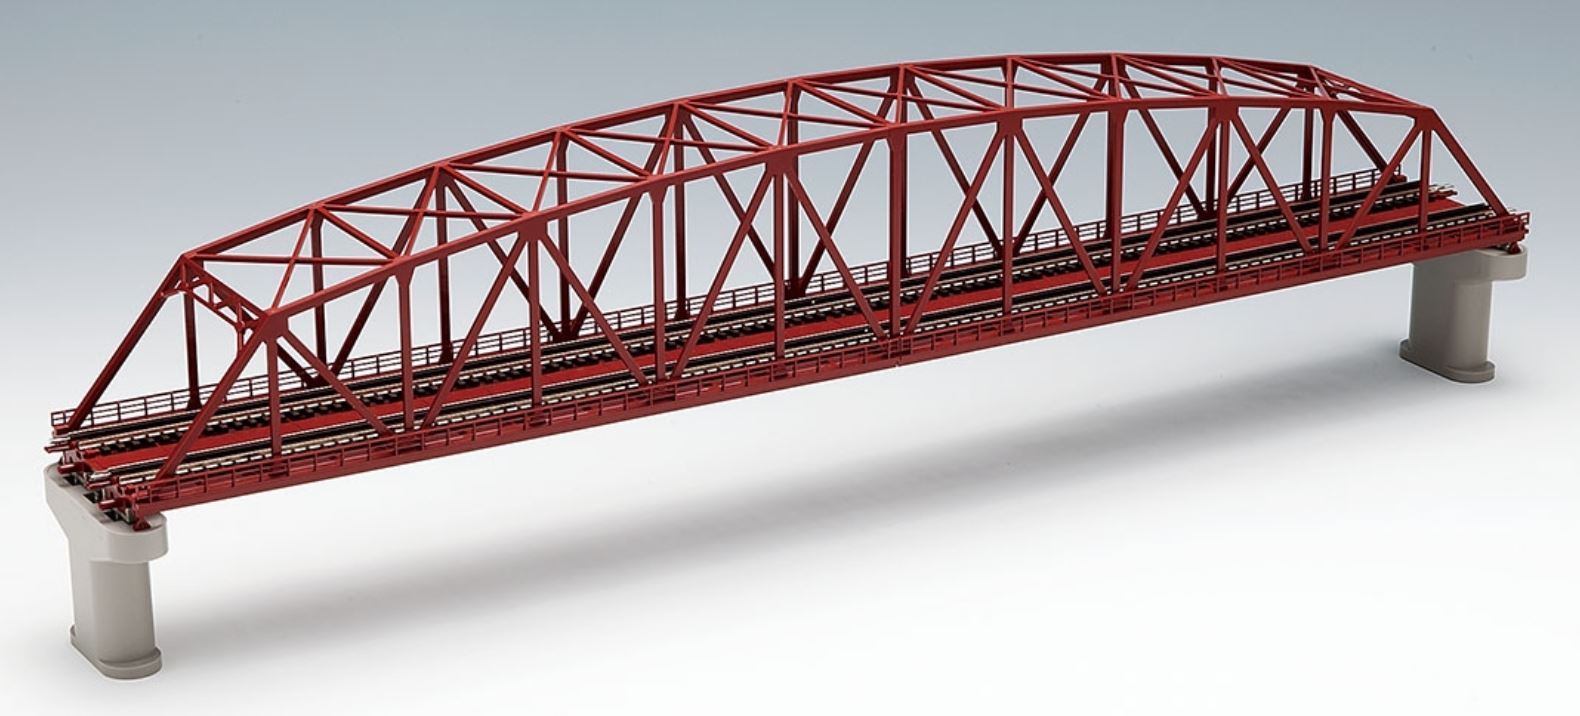 Tomix 03221 3221 N Tracks Bridges, Double Track Truss Bridge With Piers 560 mm 22", Red